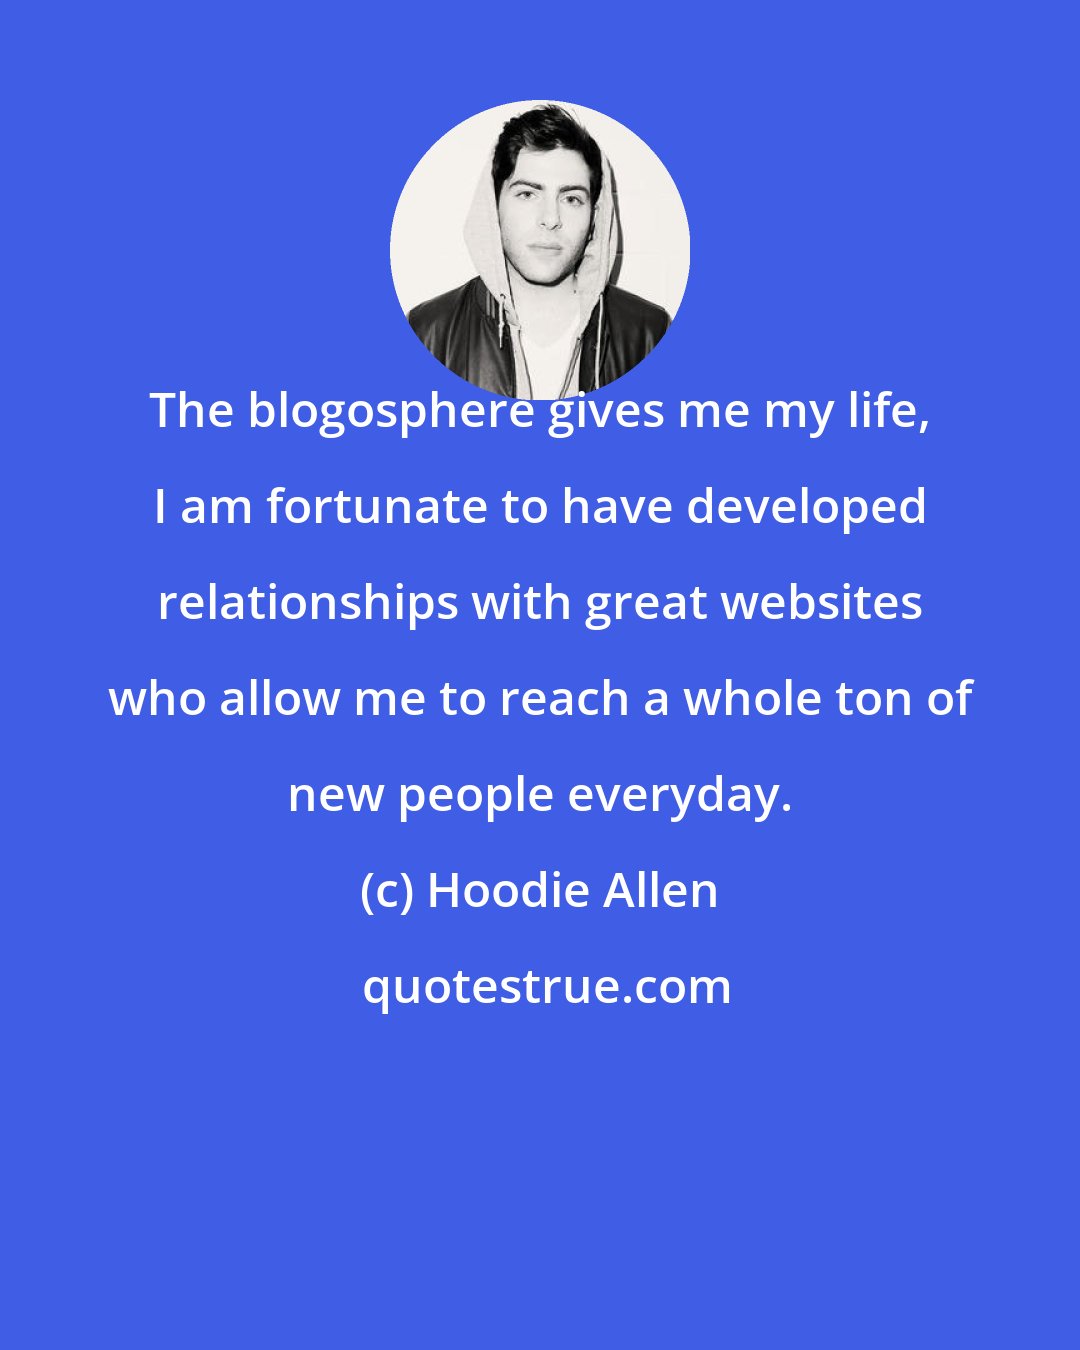 Hoodie Allen: The blogosphere gives me my life, I am fortunate to have developed relationships with great websites who allow me to reach a whole ton of new people everyday.